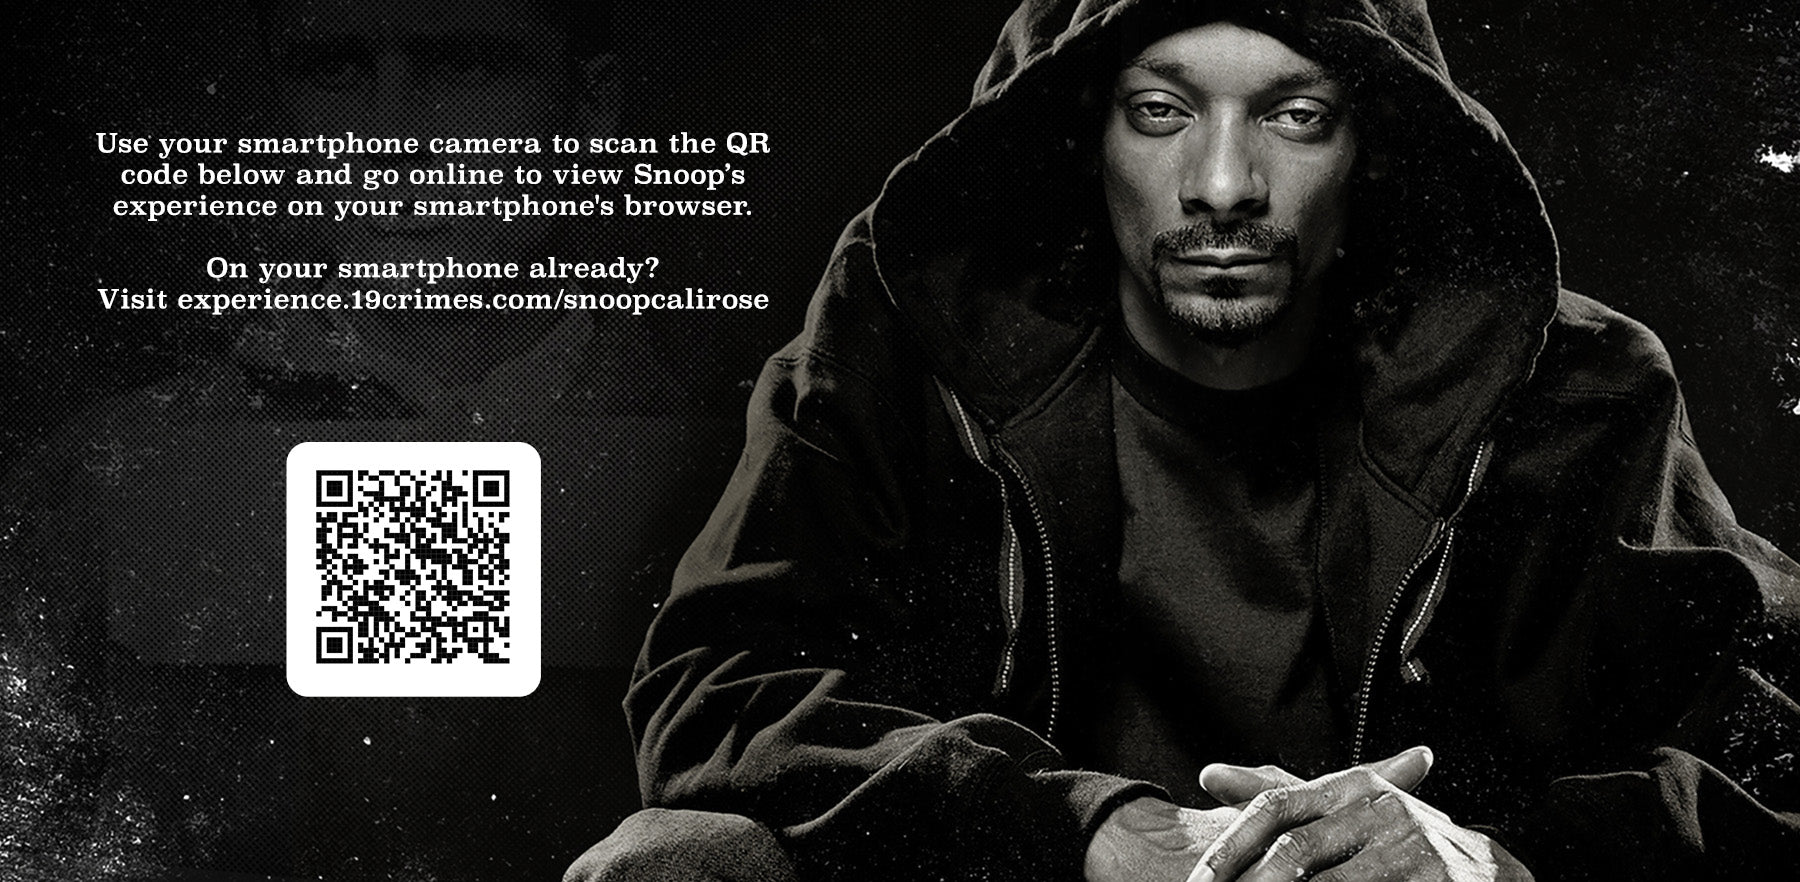 To experience 19 Crimes Snoop Dogg Cali Rose experience go to experience.19crimes.com/snoopcalirose on your mobile browser